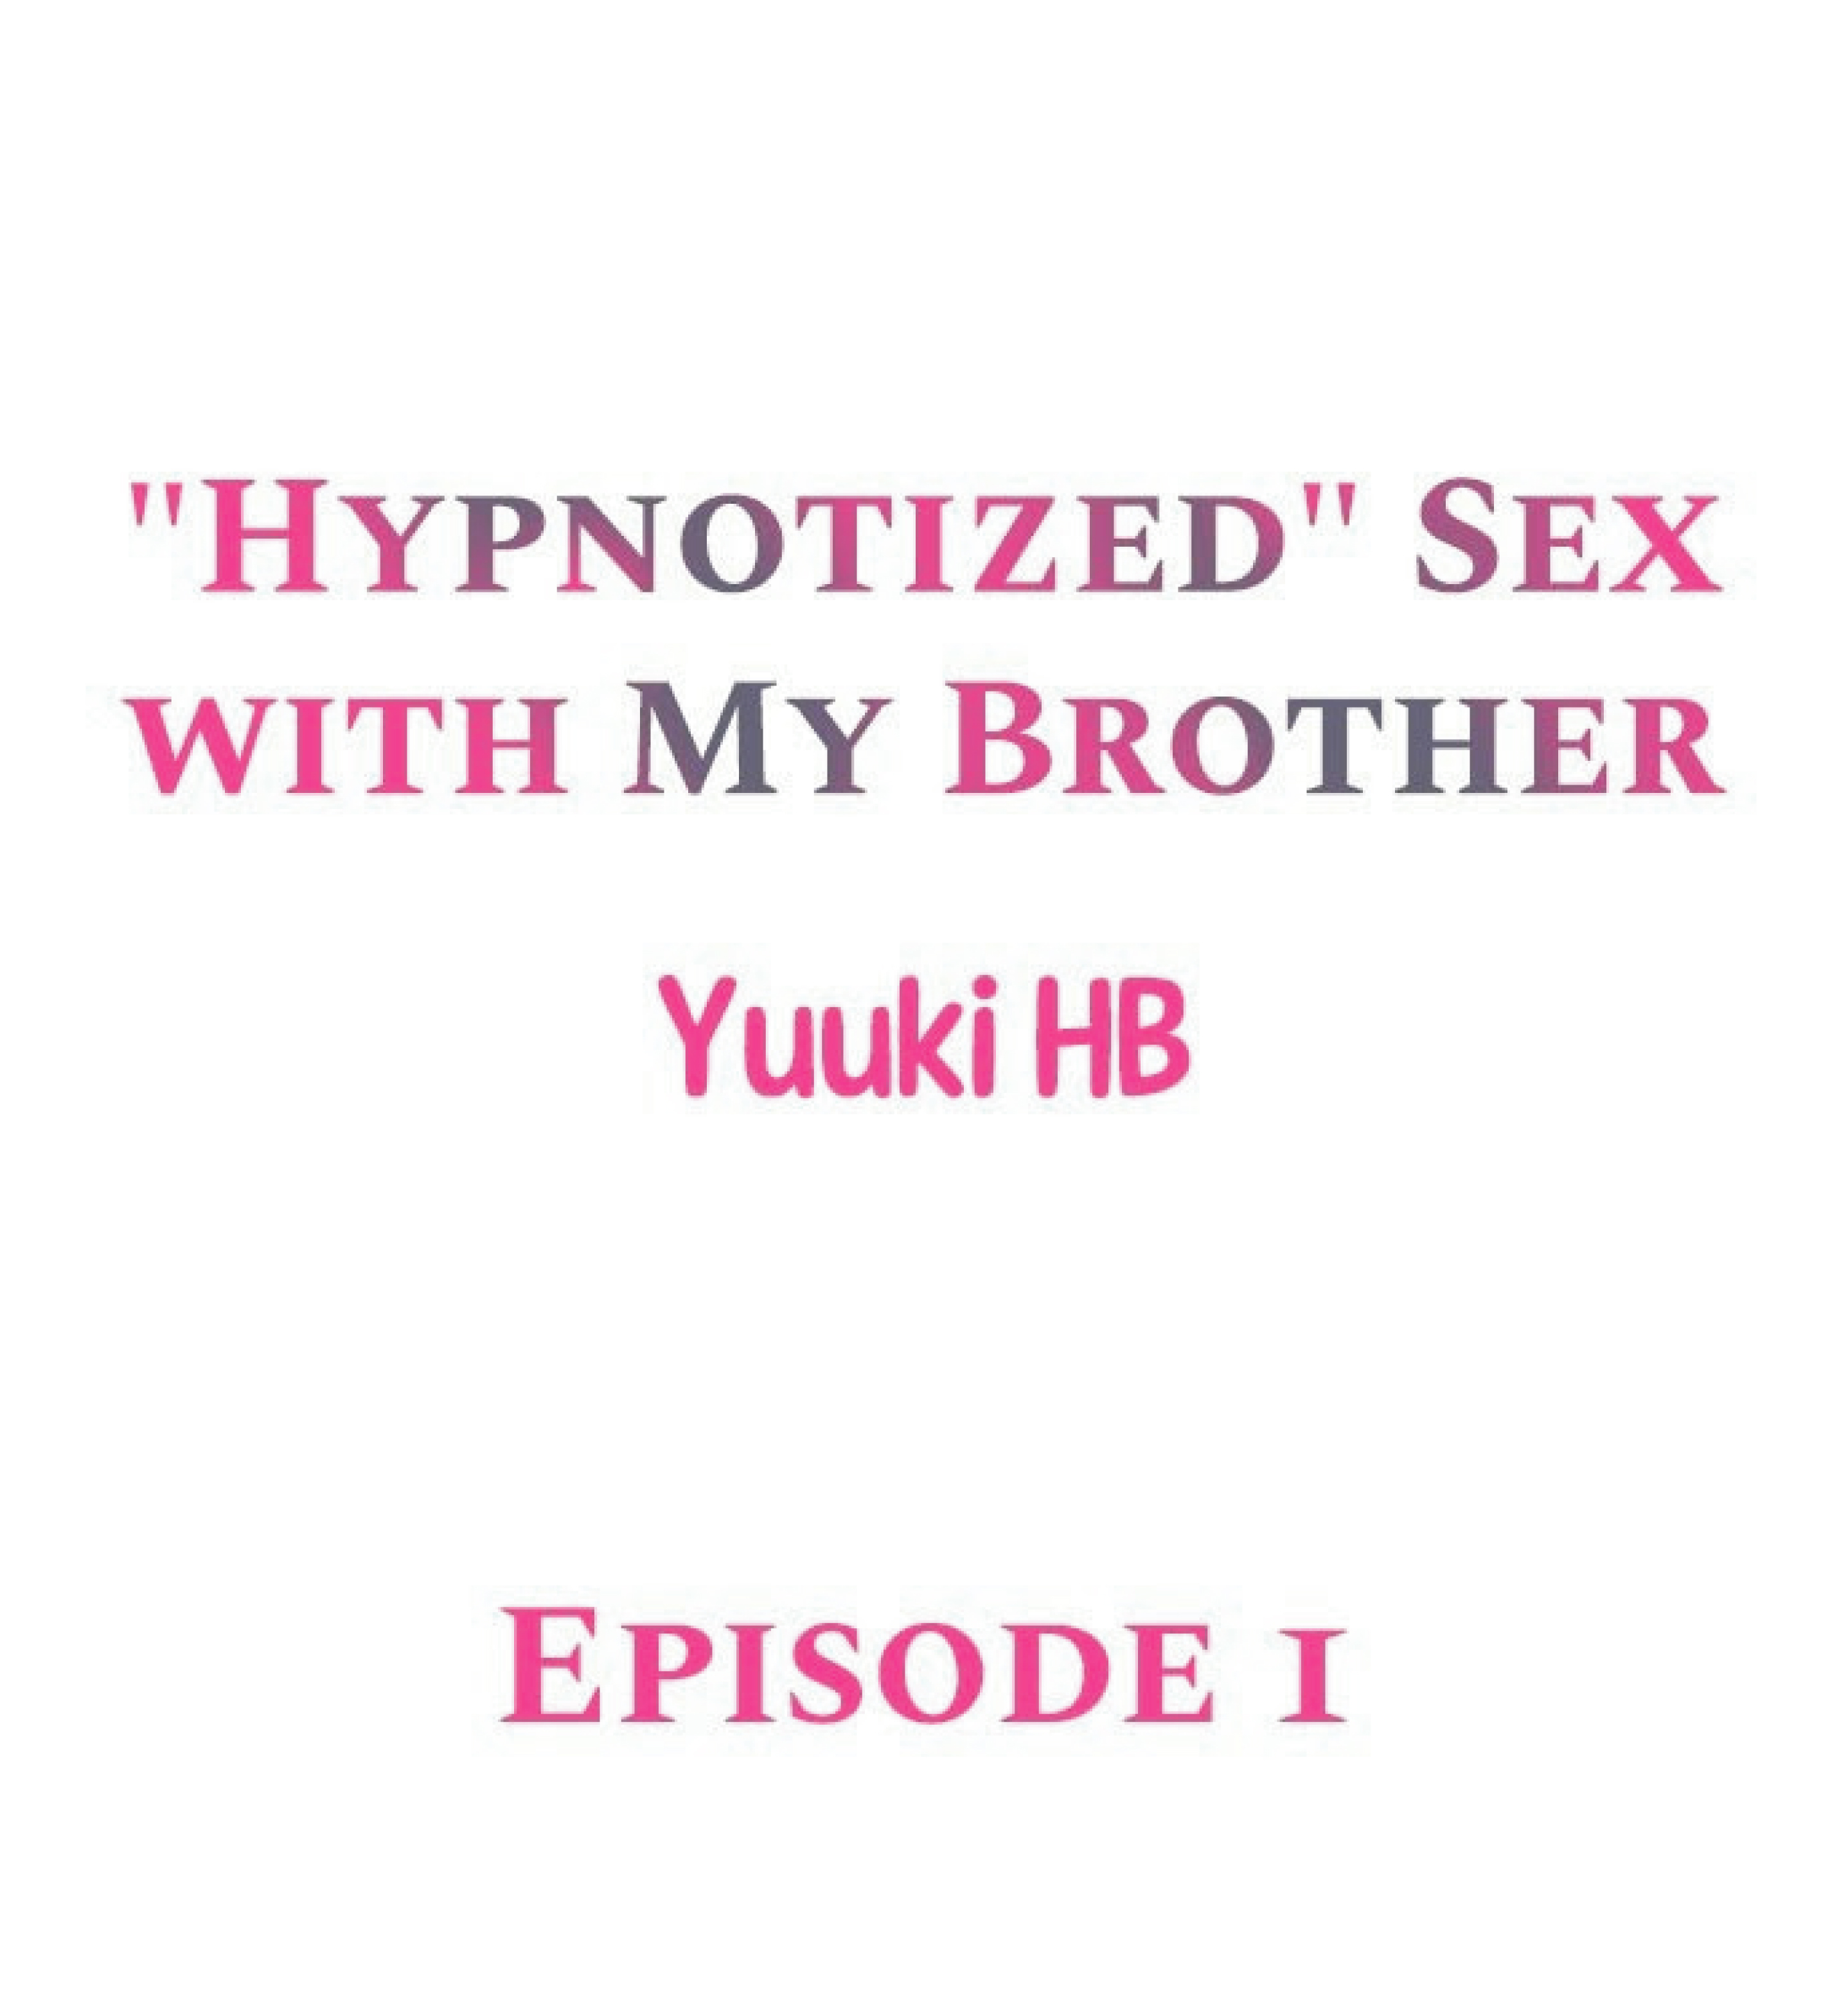 Hypnotized Sex With My Brother 1 (1)